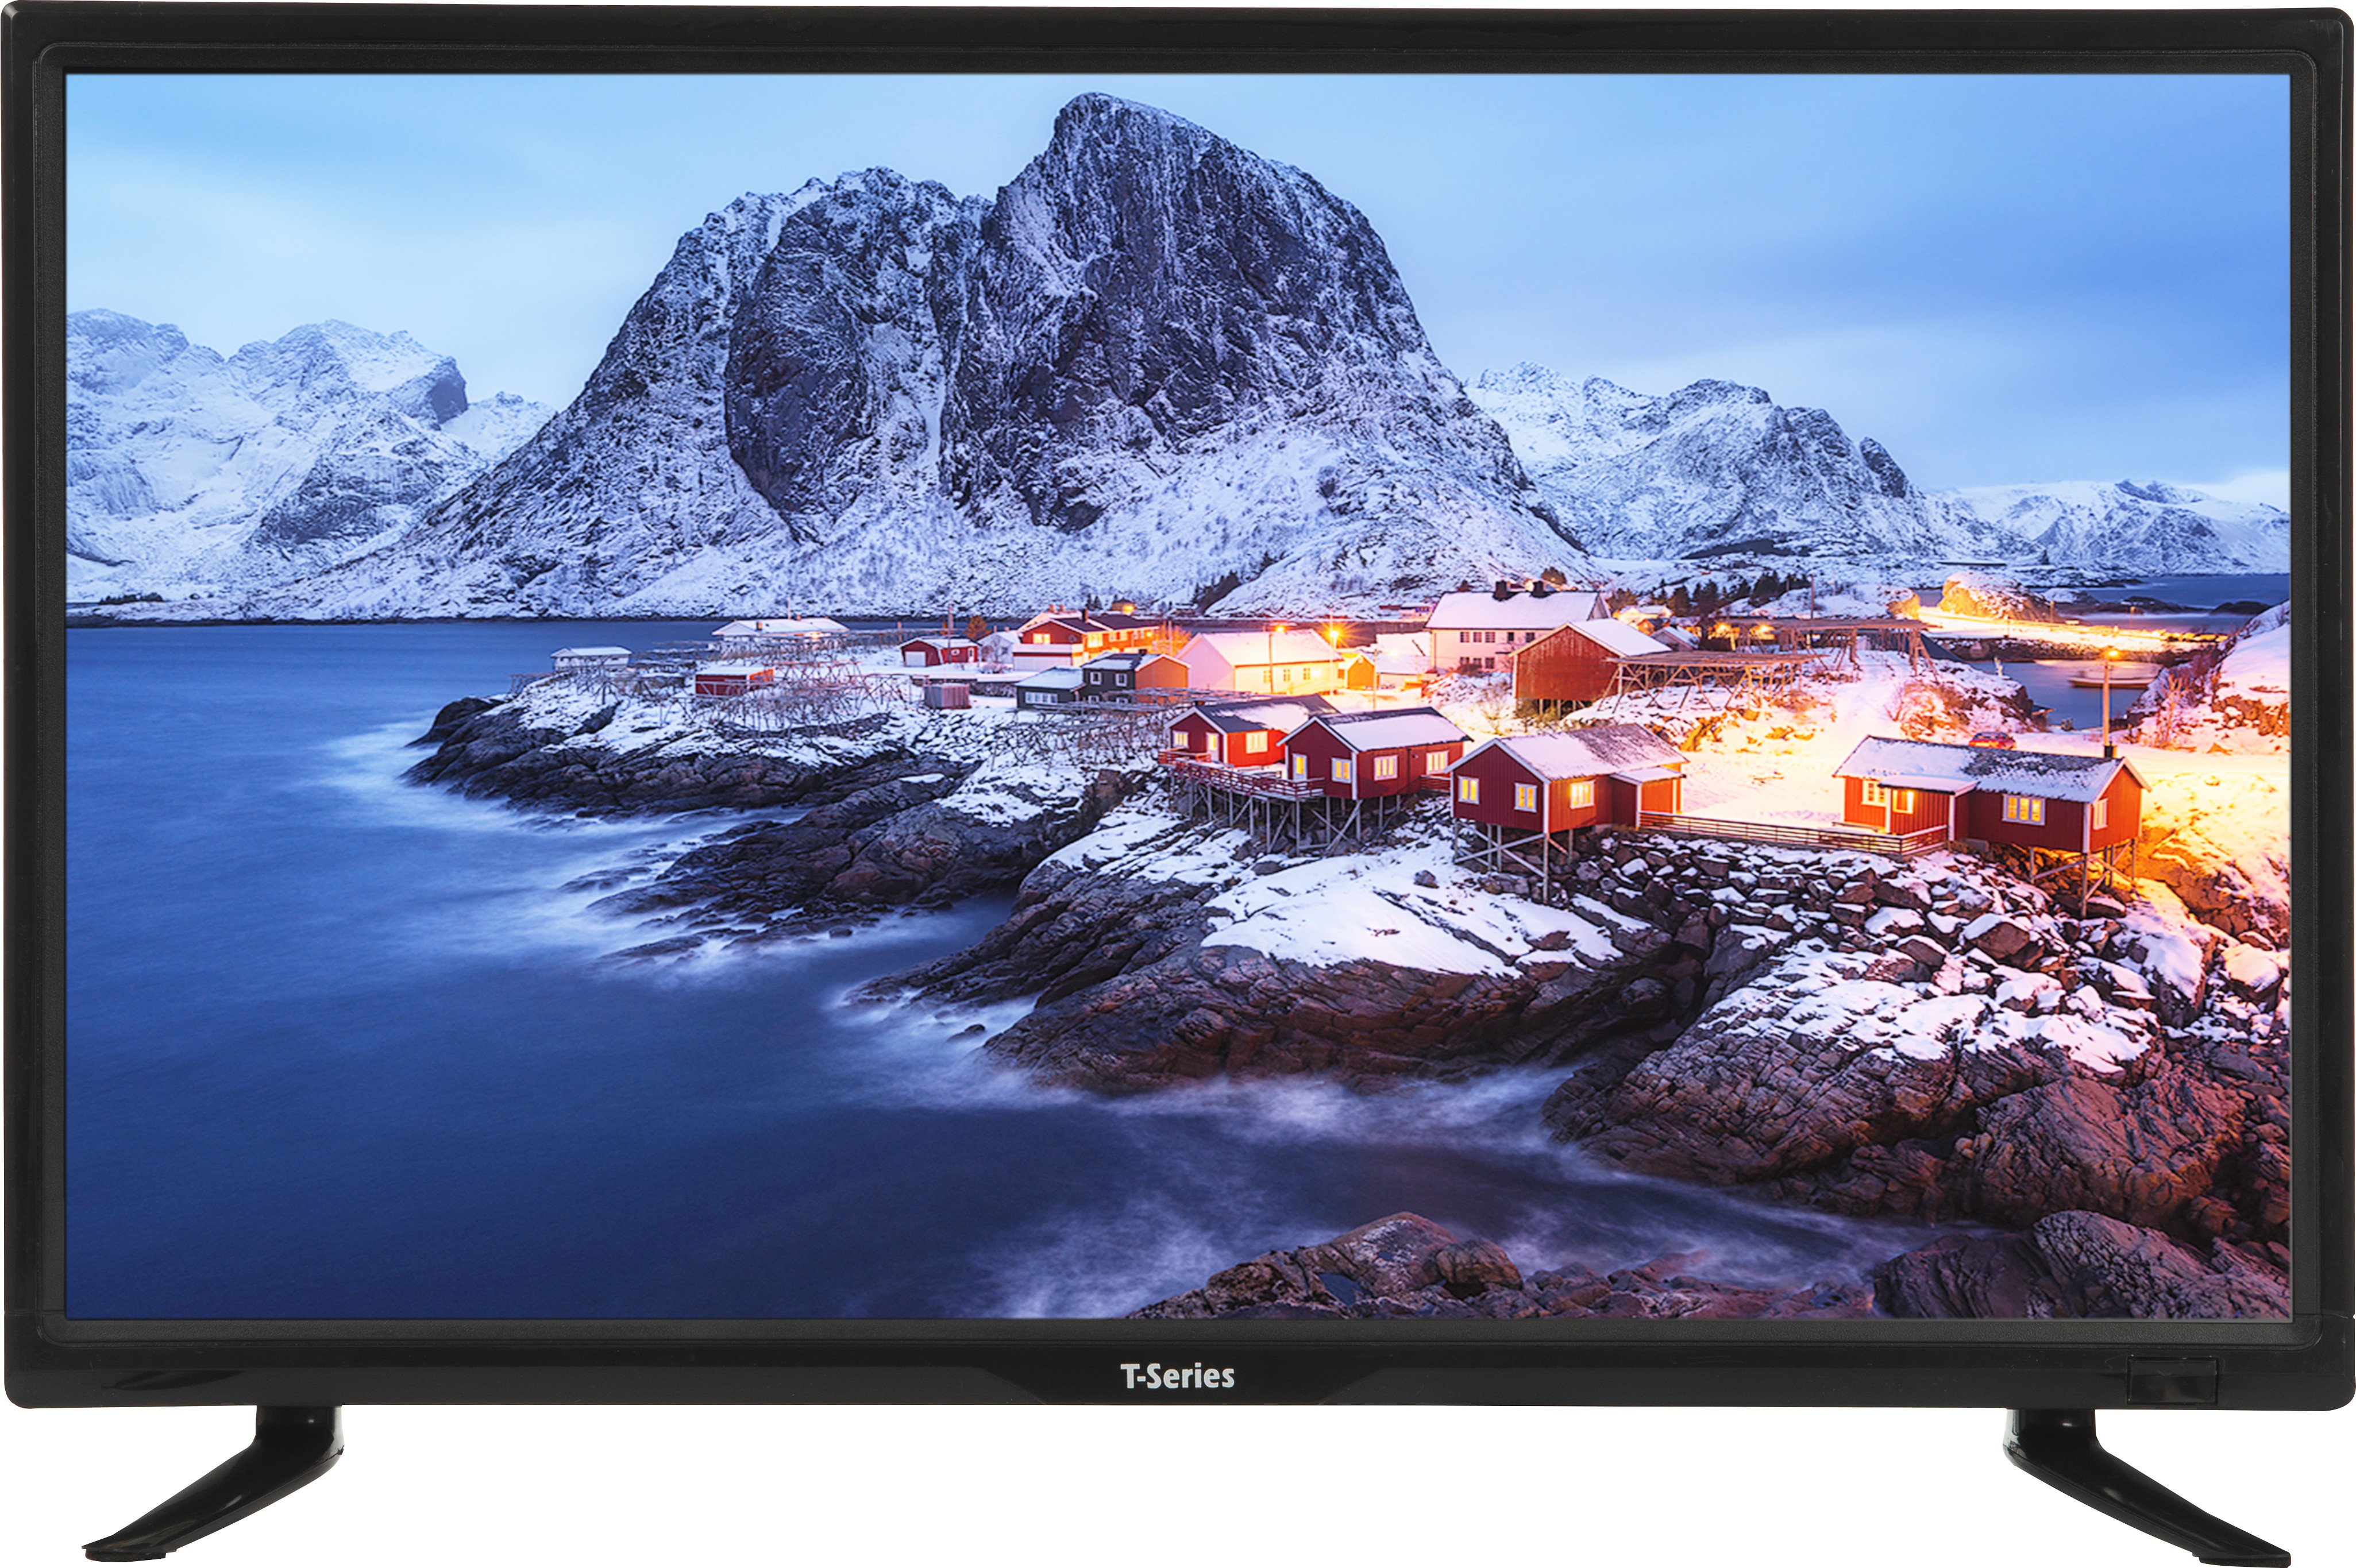 T-Series   (24 inch) HD ReadyLED (TX24K)